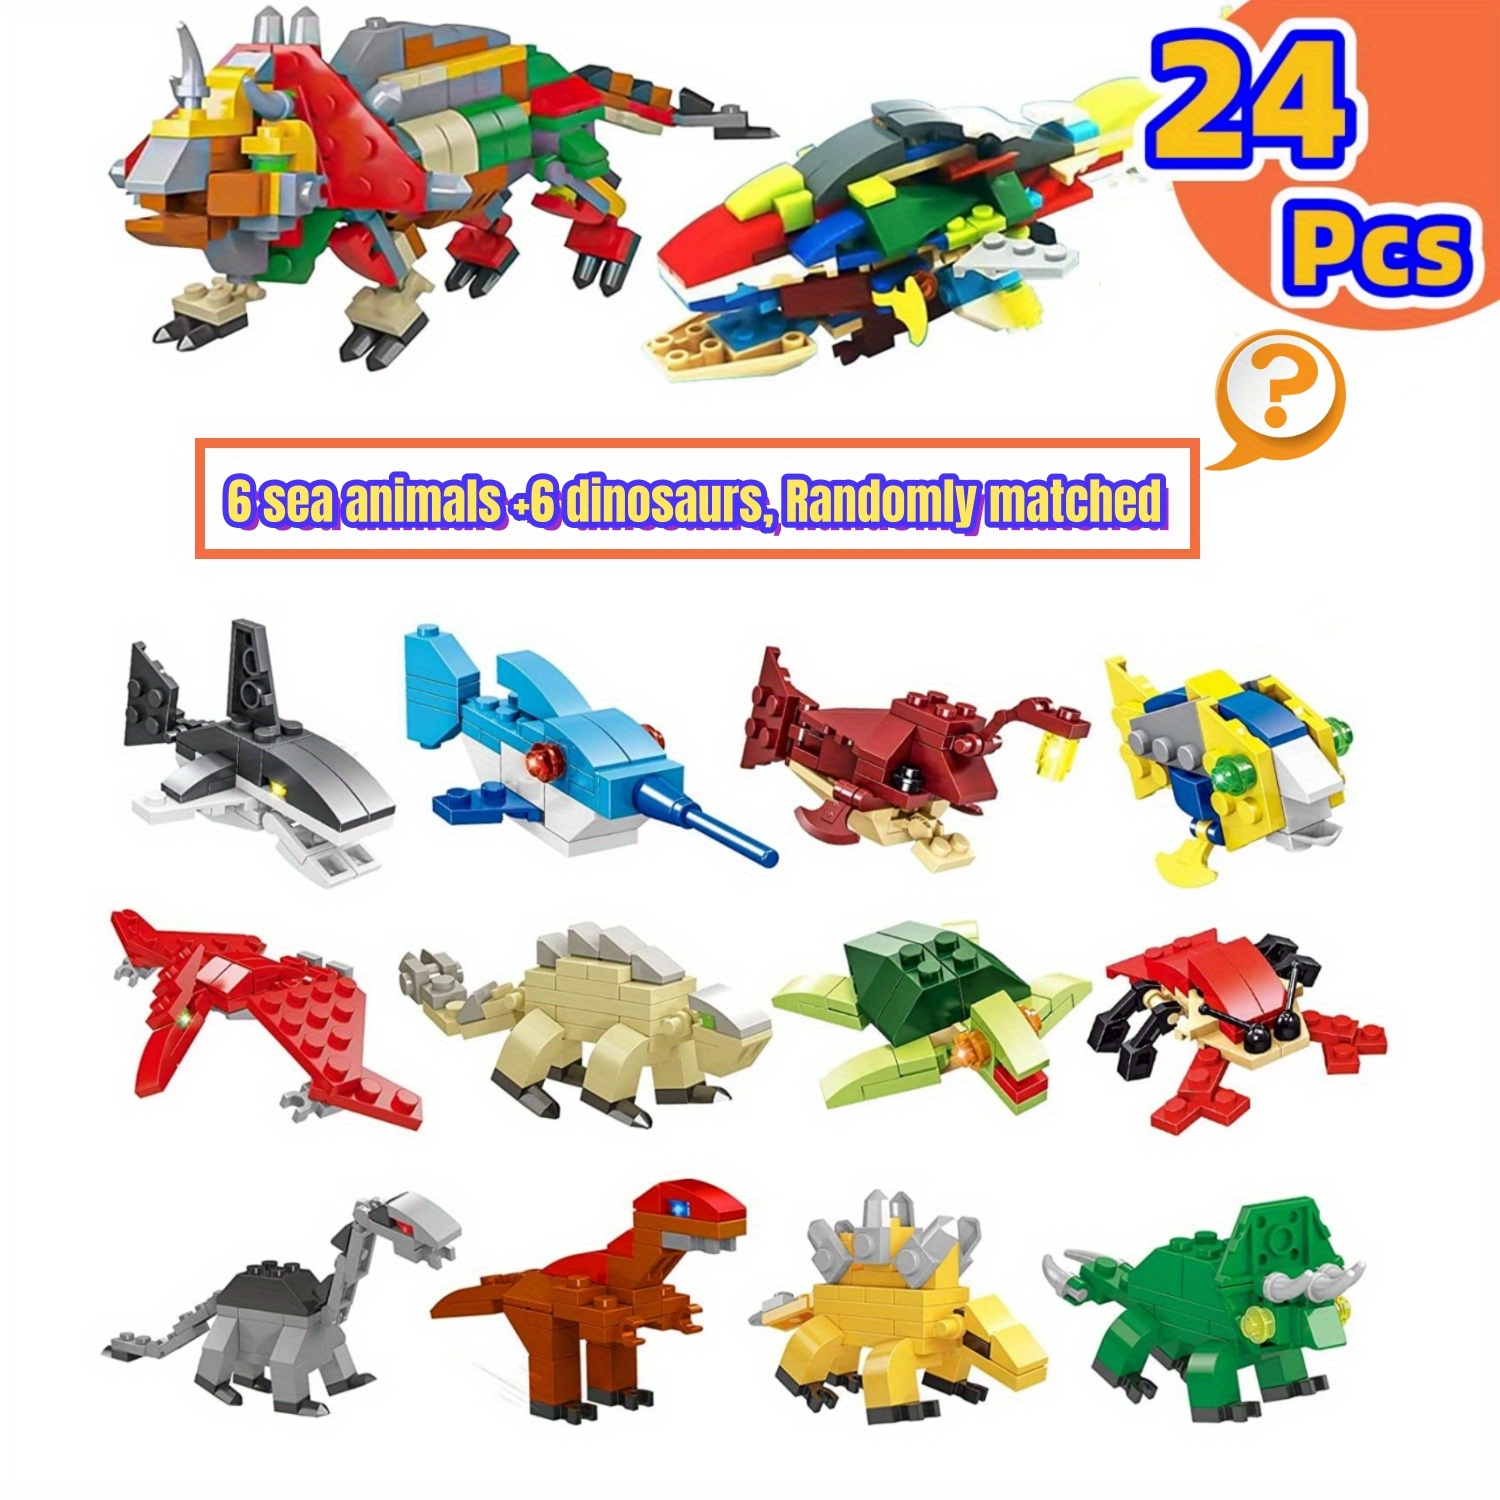 24 Packs Valentines Day Gifts for Kids School, Animal Building Blocks with  Valentines Cards for Kids Classroom, Class Gifts Exchange, Party Favors for